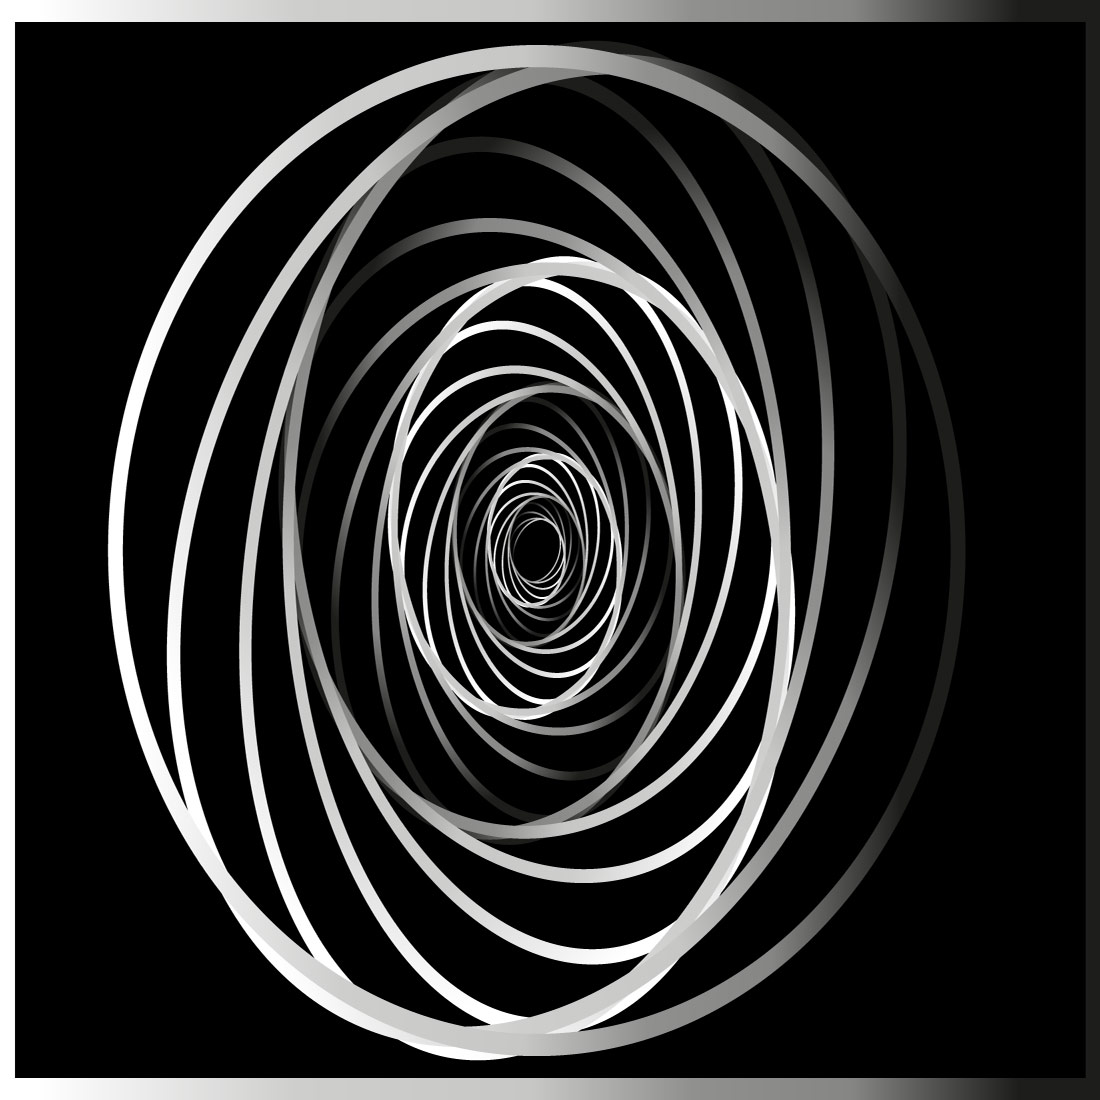 gradient background with black and white spirals3 359